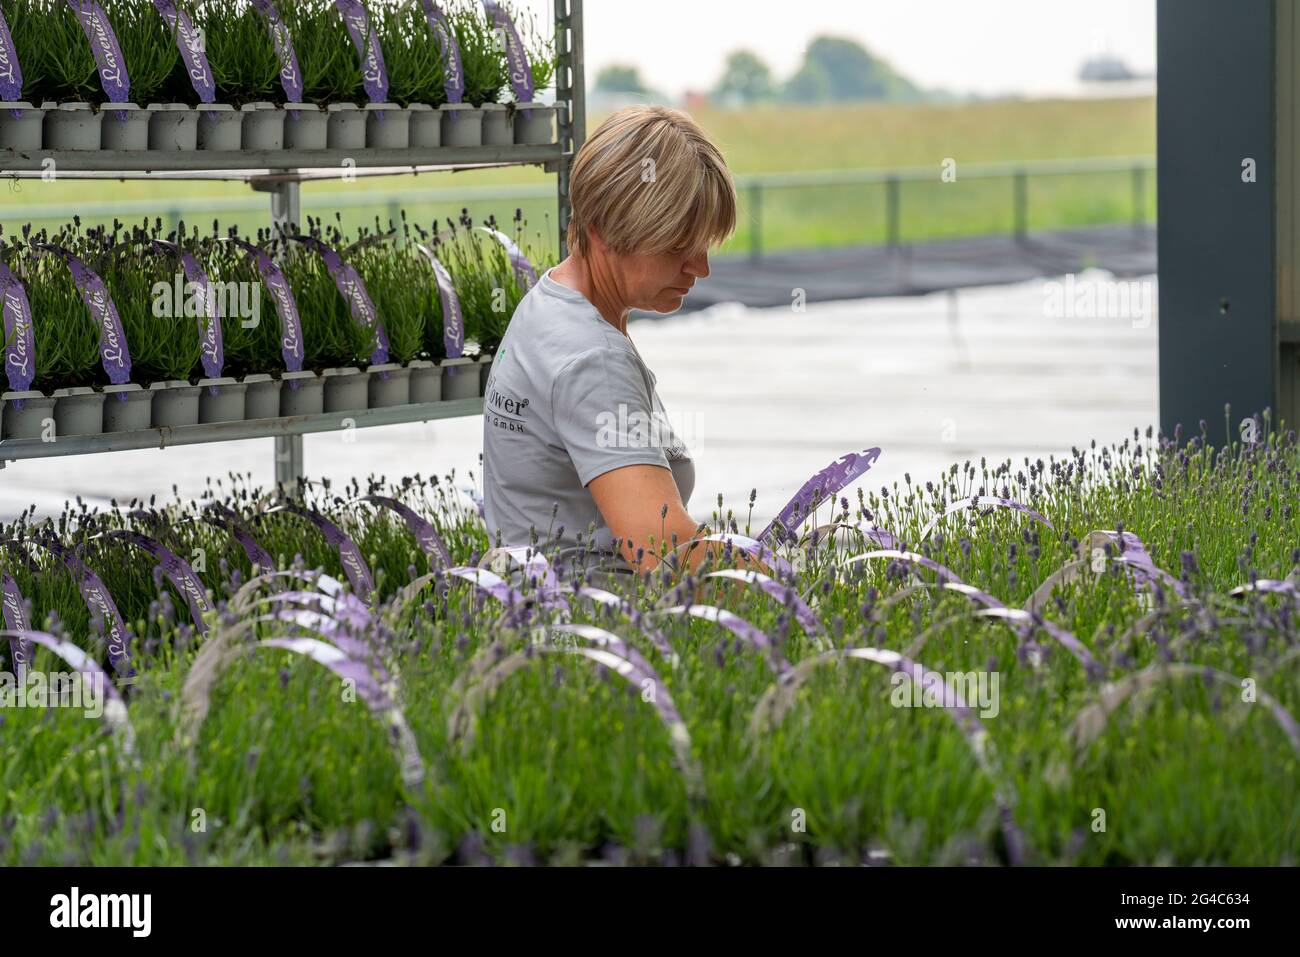 Horticultural company, lavender plants, in flower pots, outdoors, are packed to make them ready for sale, NRW, Germany Stock Photo